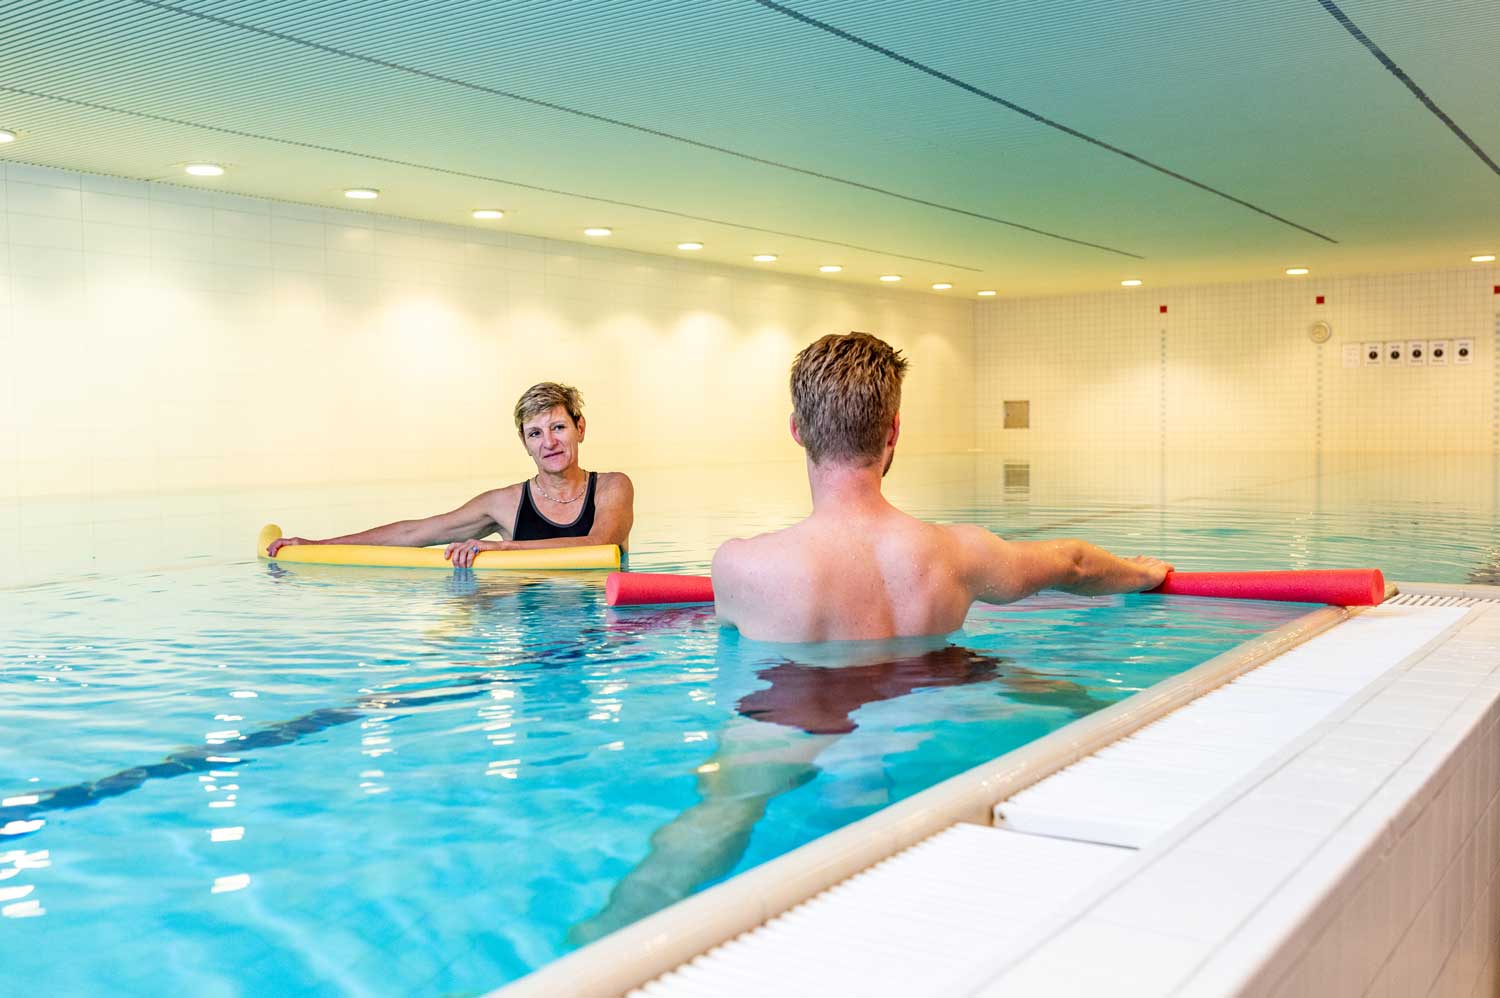 A female patient and a male patient stand in water up to their chests and perform flexibility exercises with a pool noodle in their hands.